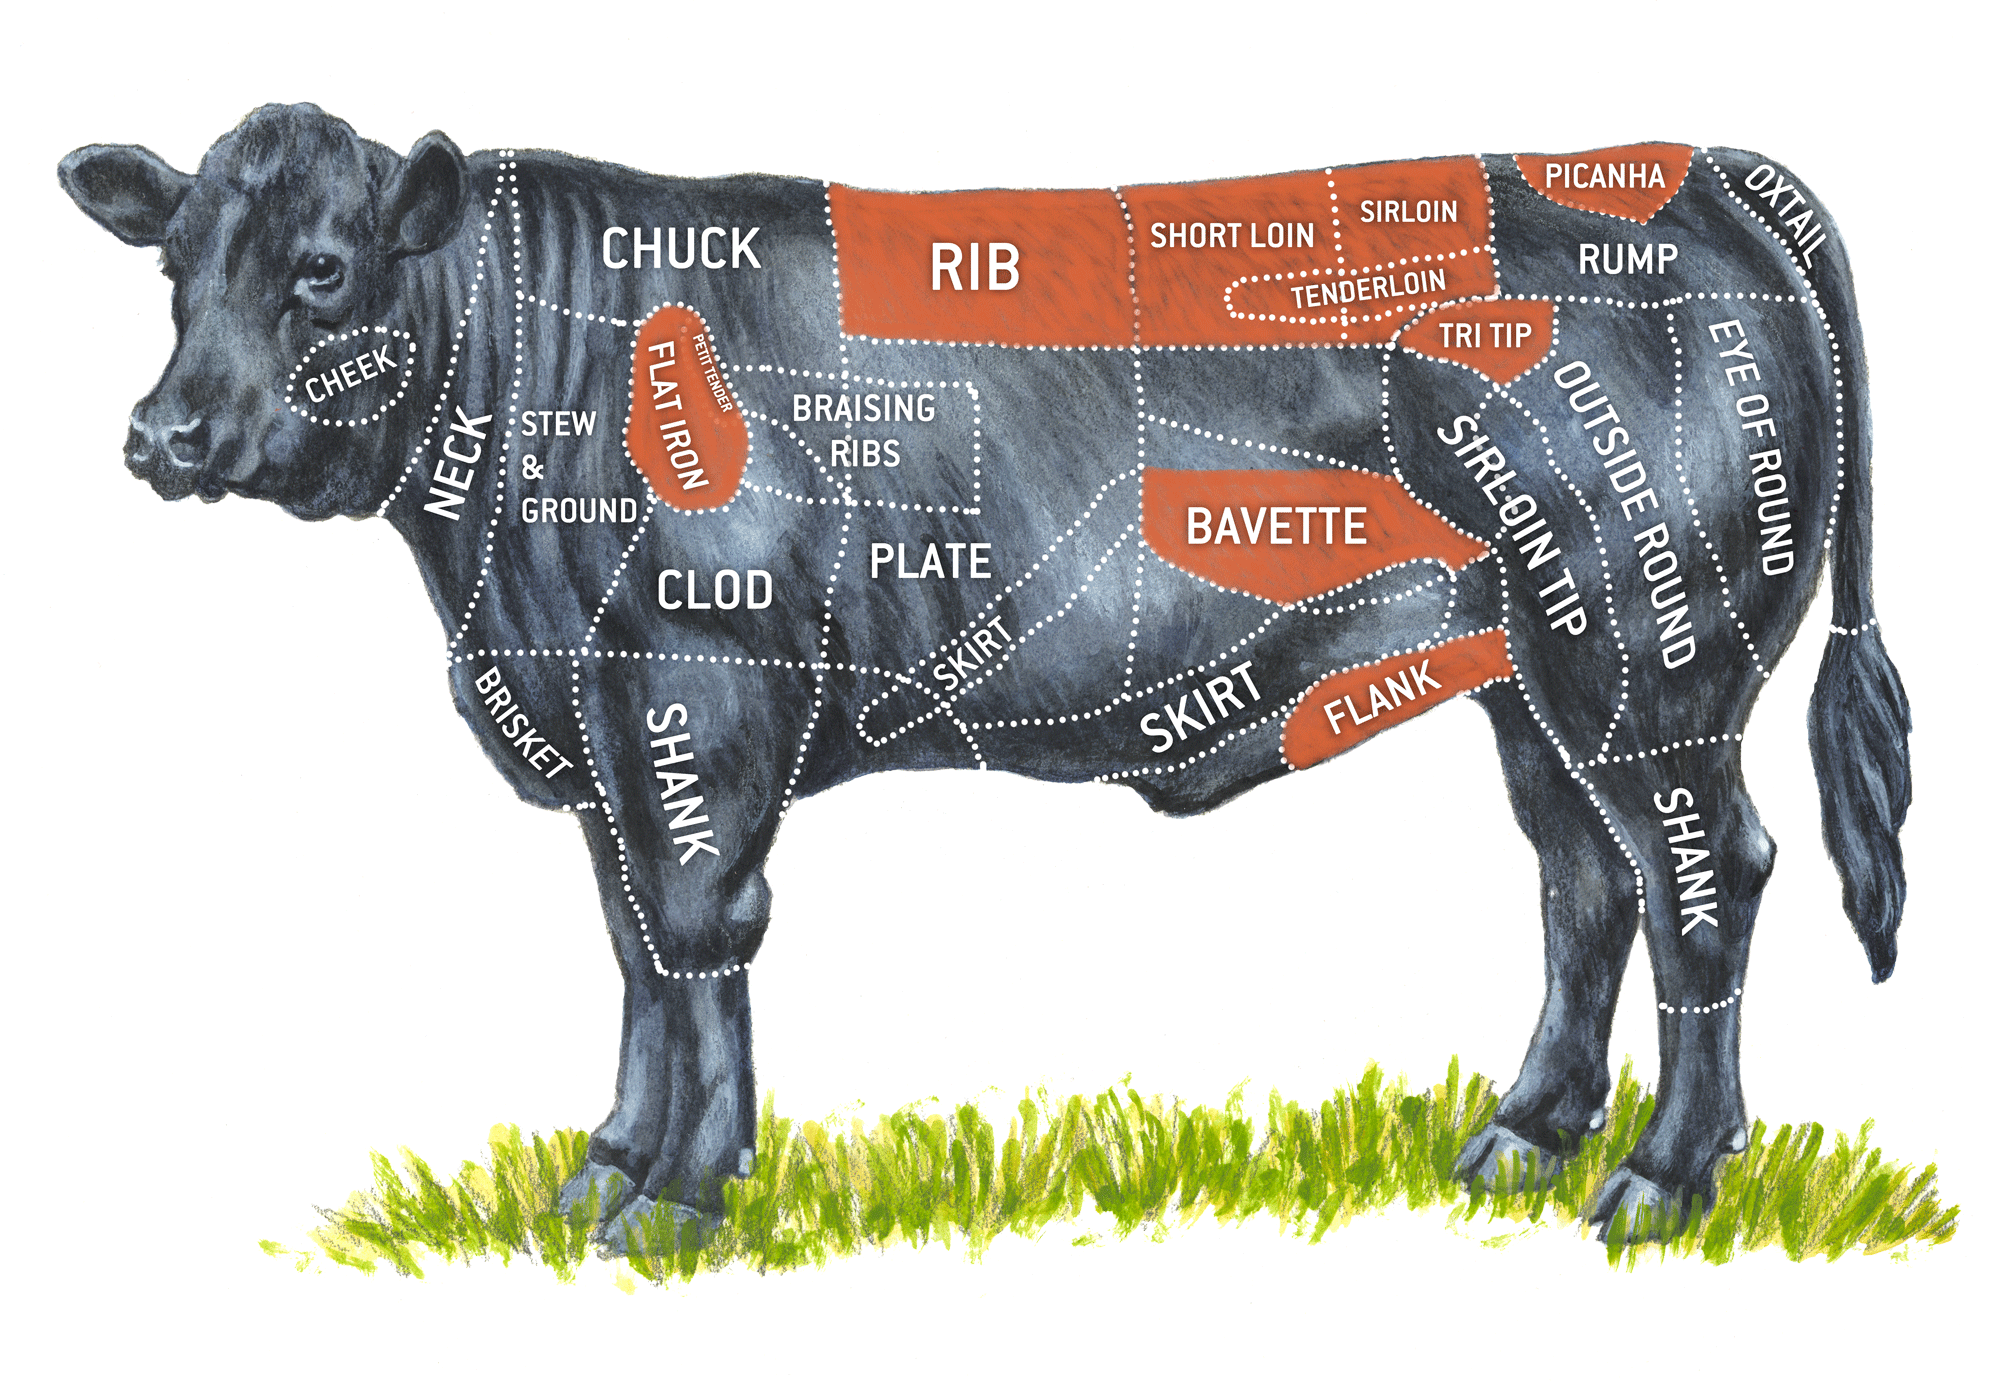 What's the Most Expensive Cut of Beef? - Clover Meadows Beef